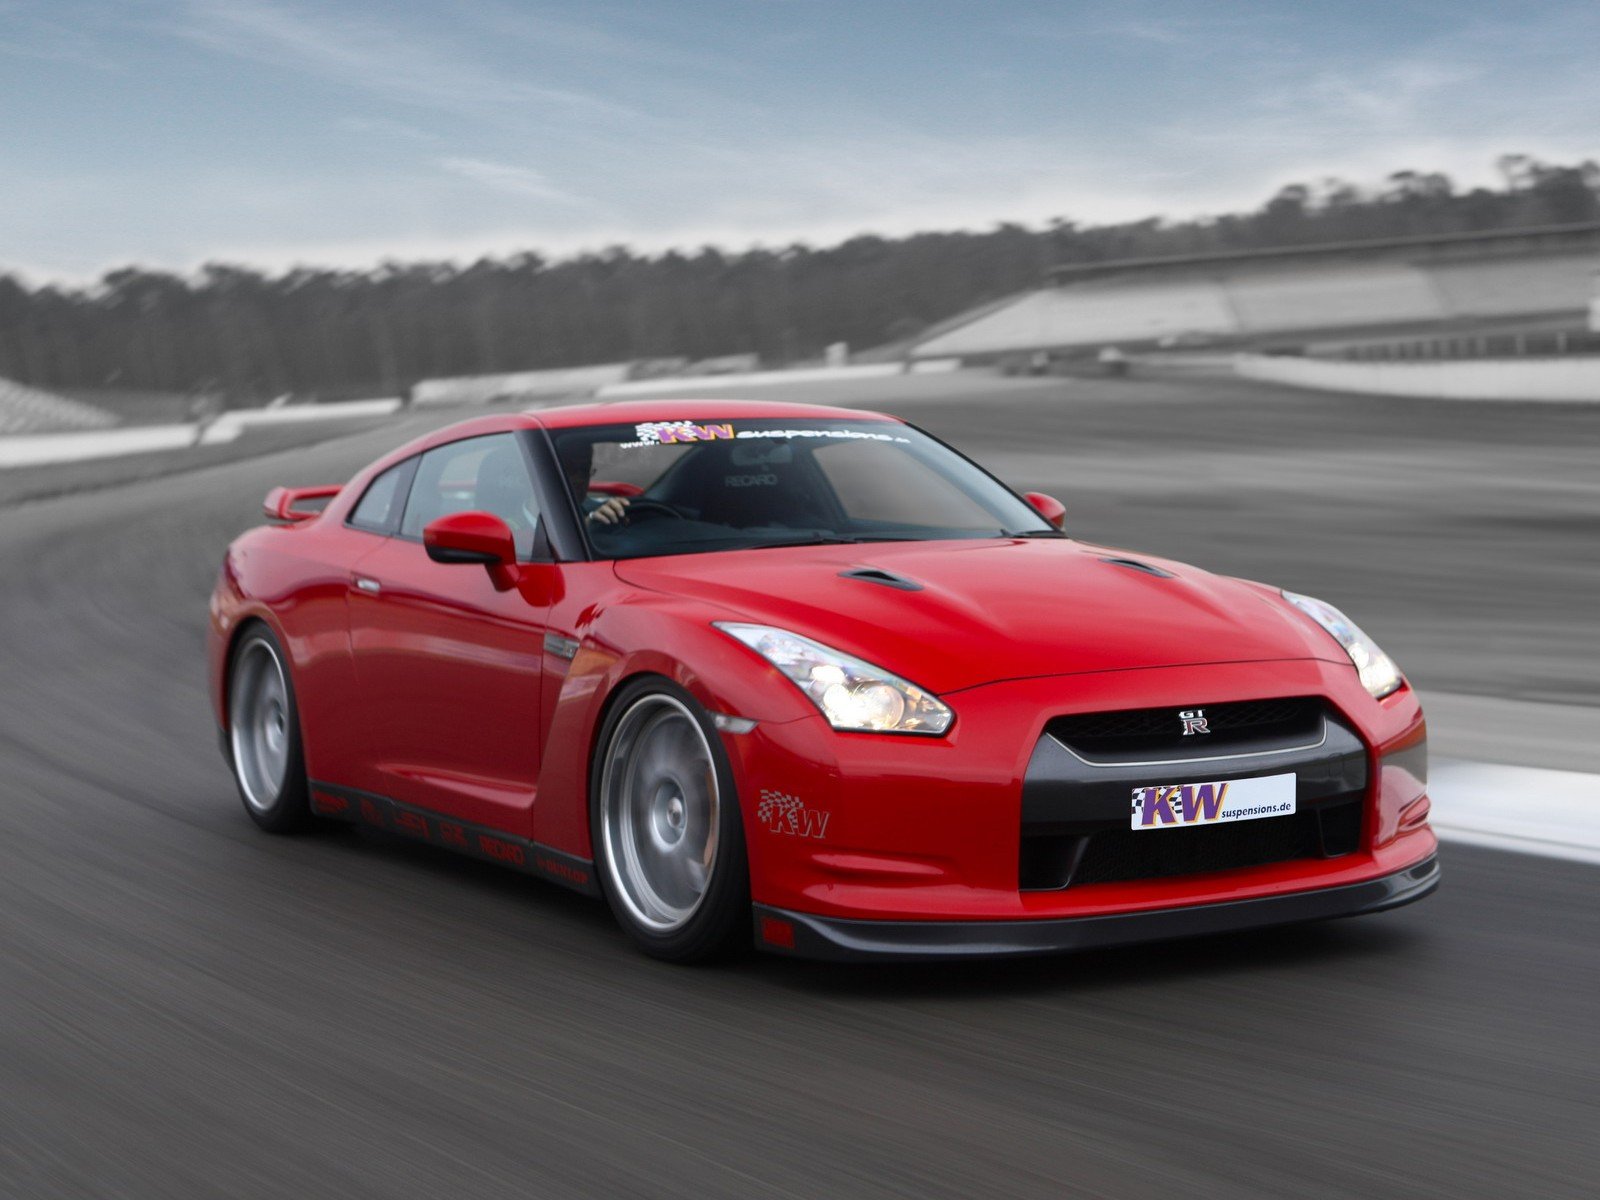 hd wallpapers nissan gtr hd wallpapers nissan gtr hd wallpapers